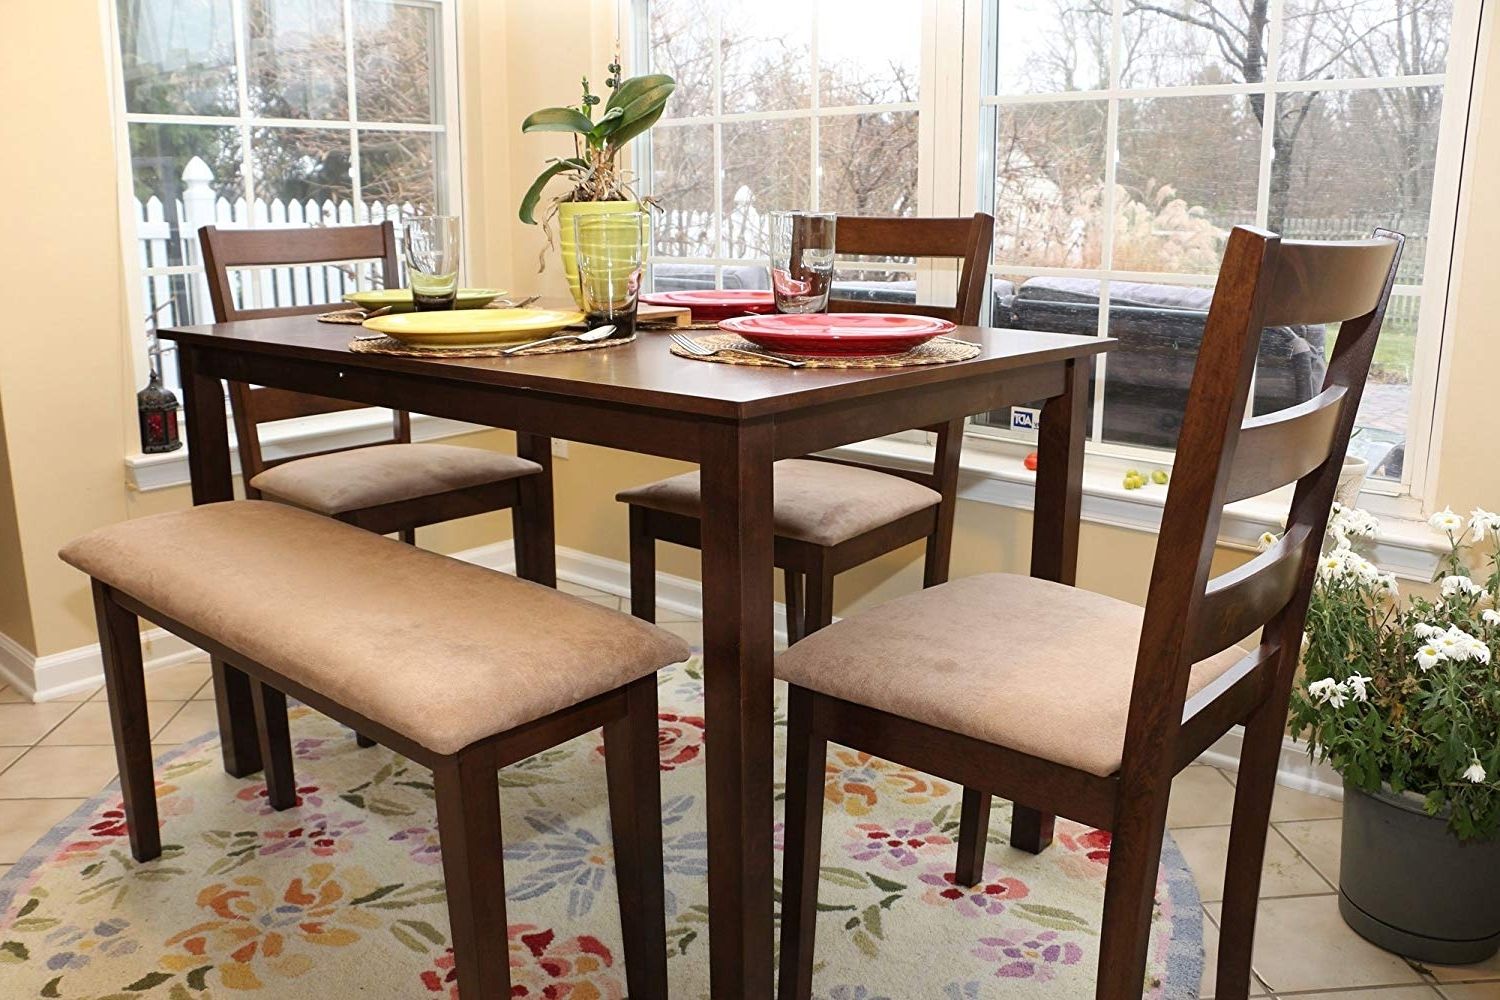 Amazon – 5pc Dining Dinette Table Chairs & Bench Set Walnut Inside Well Known Walnut Dining Tables And Chairs (View 2 of 25)